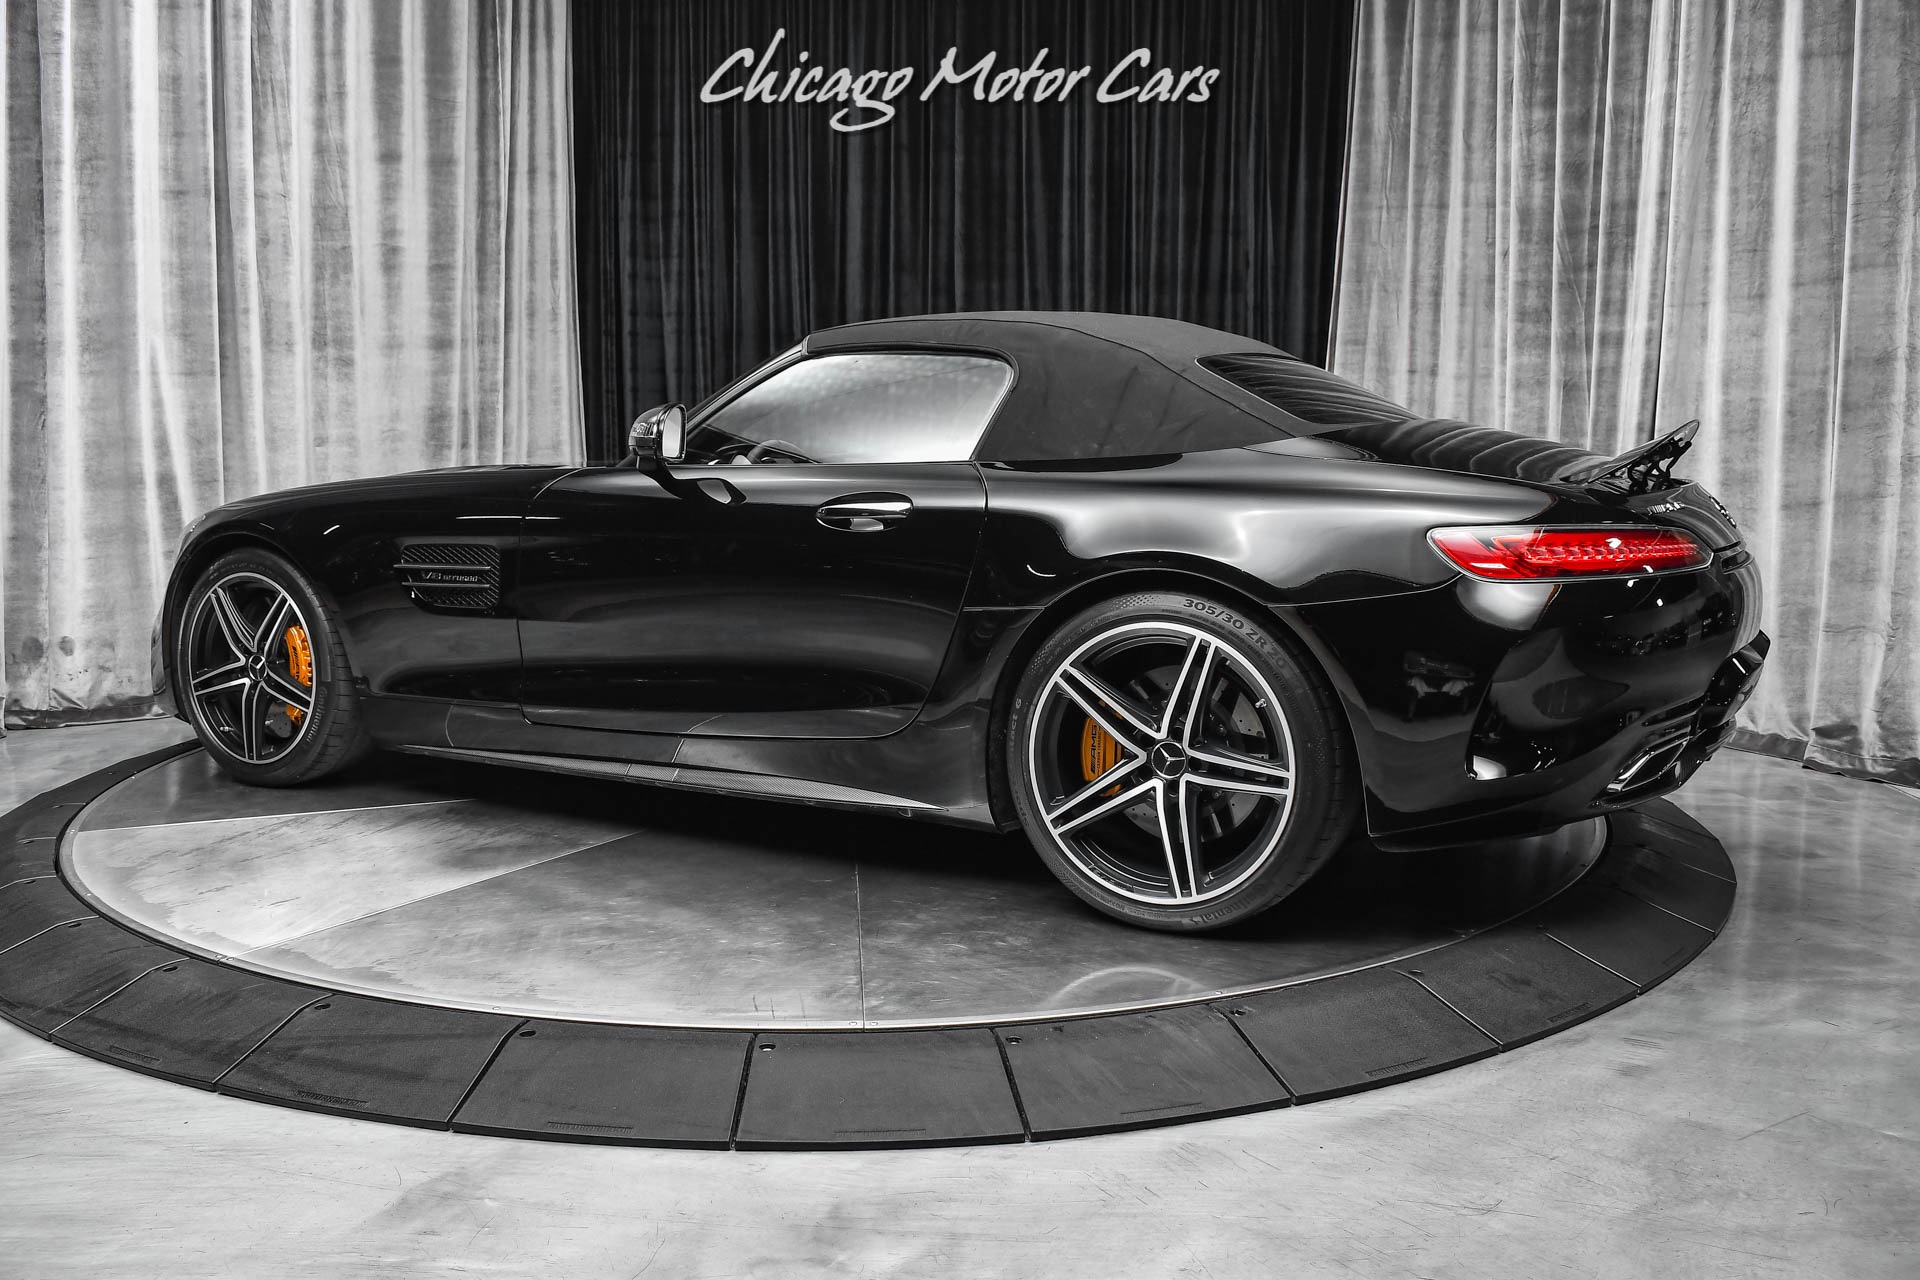 Used-2018-Mercedes-Benz-AMG-GT-C-Roadster-MSRP-180795-LOADED-with-Every-Option-Carbon-Ceramic-Brakes